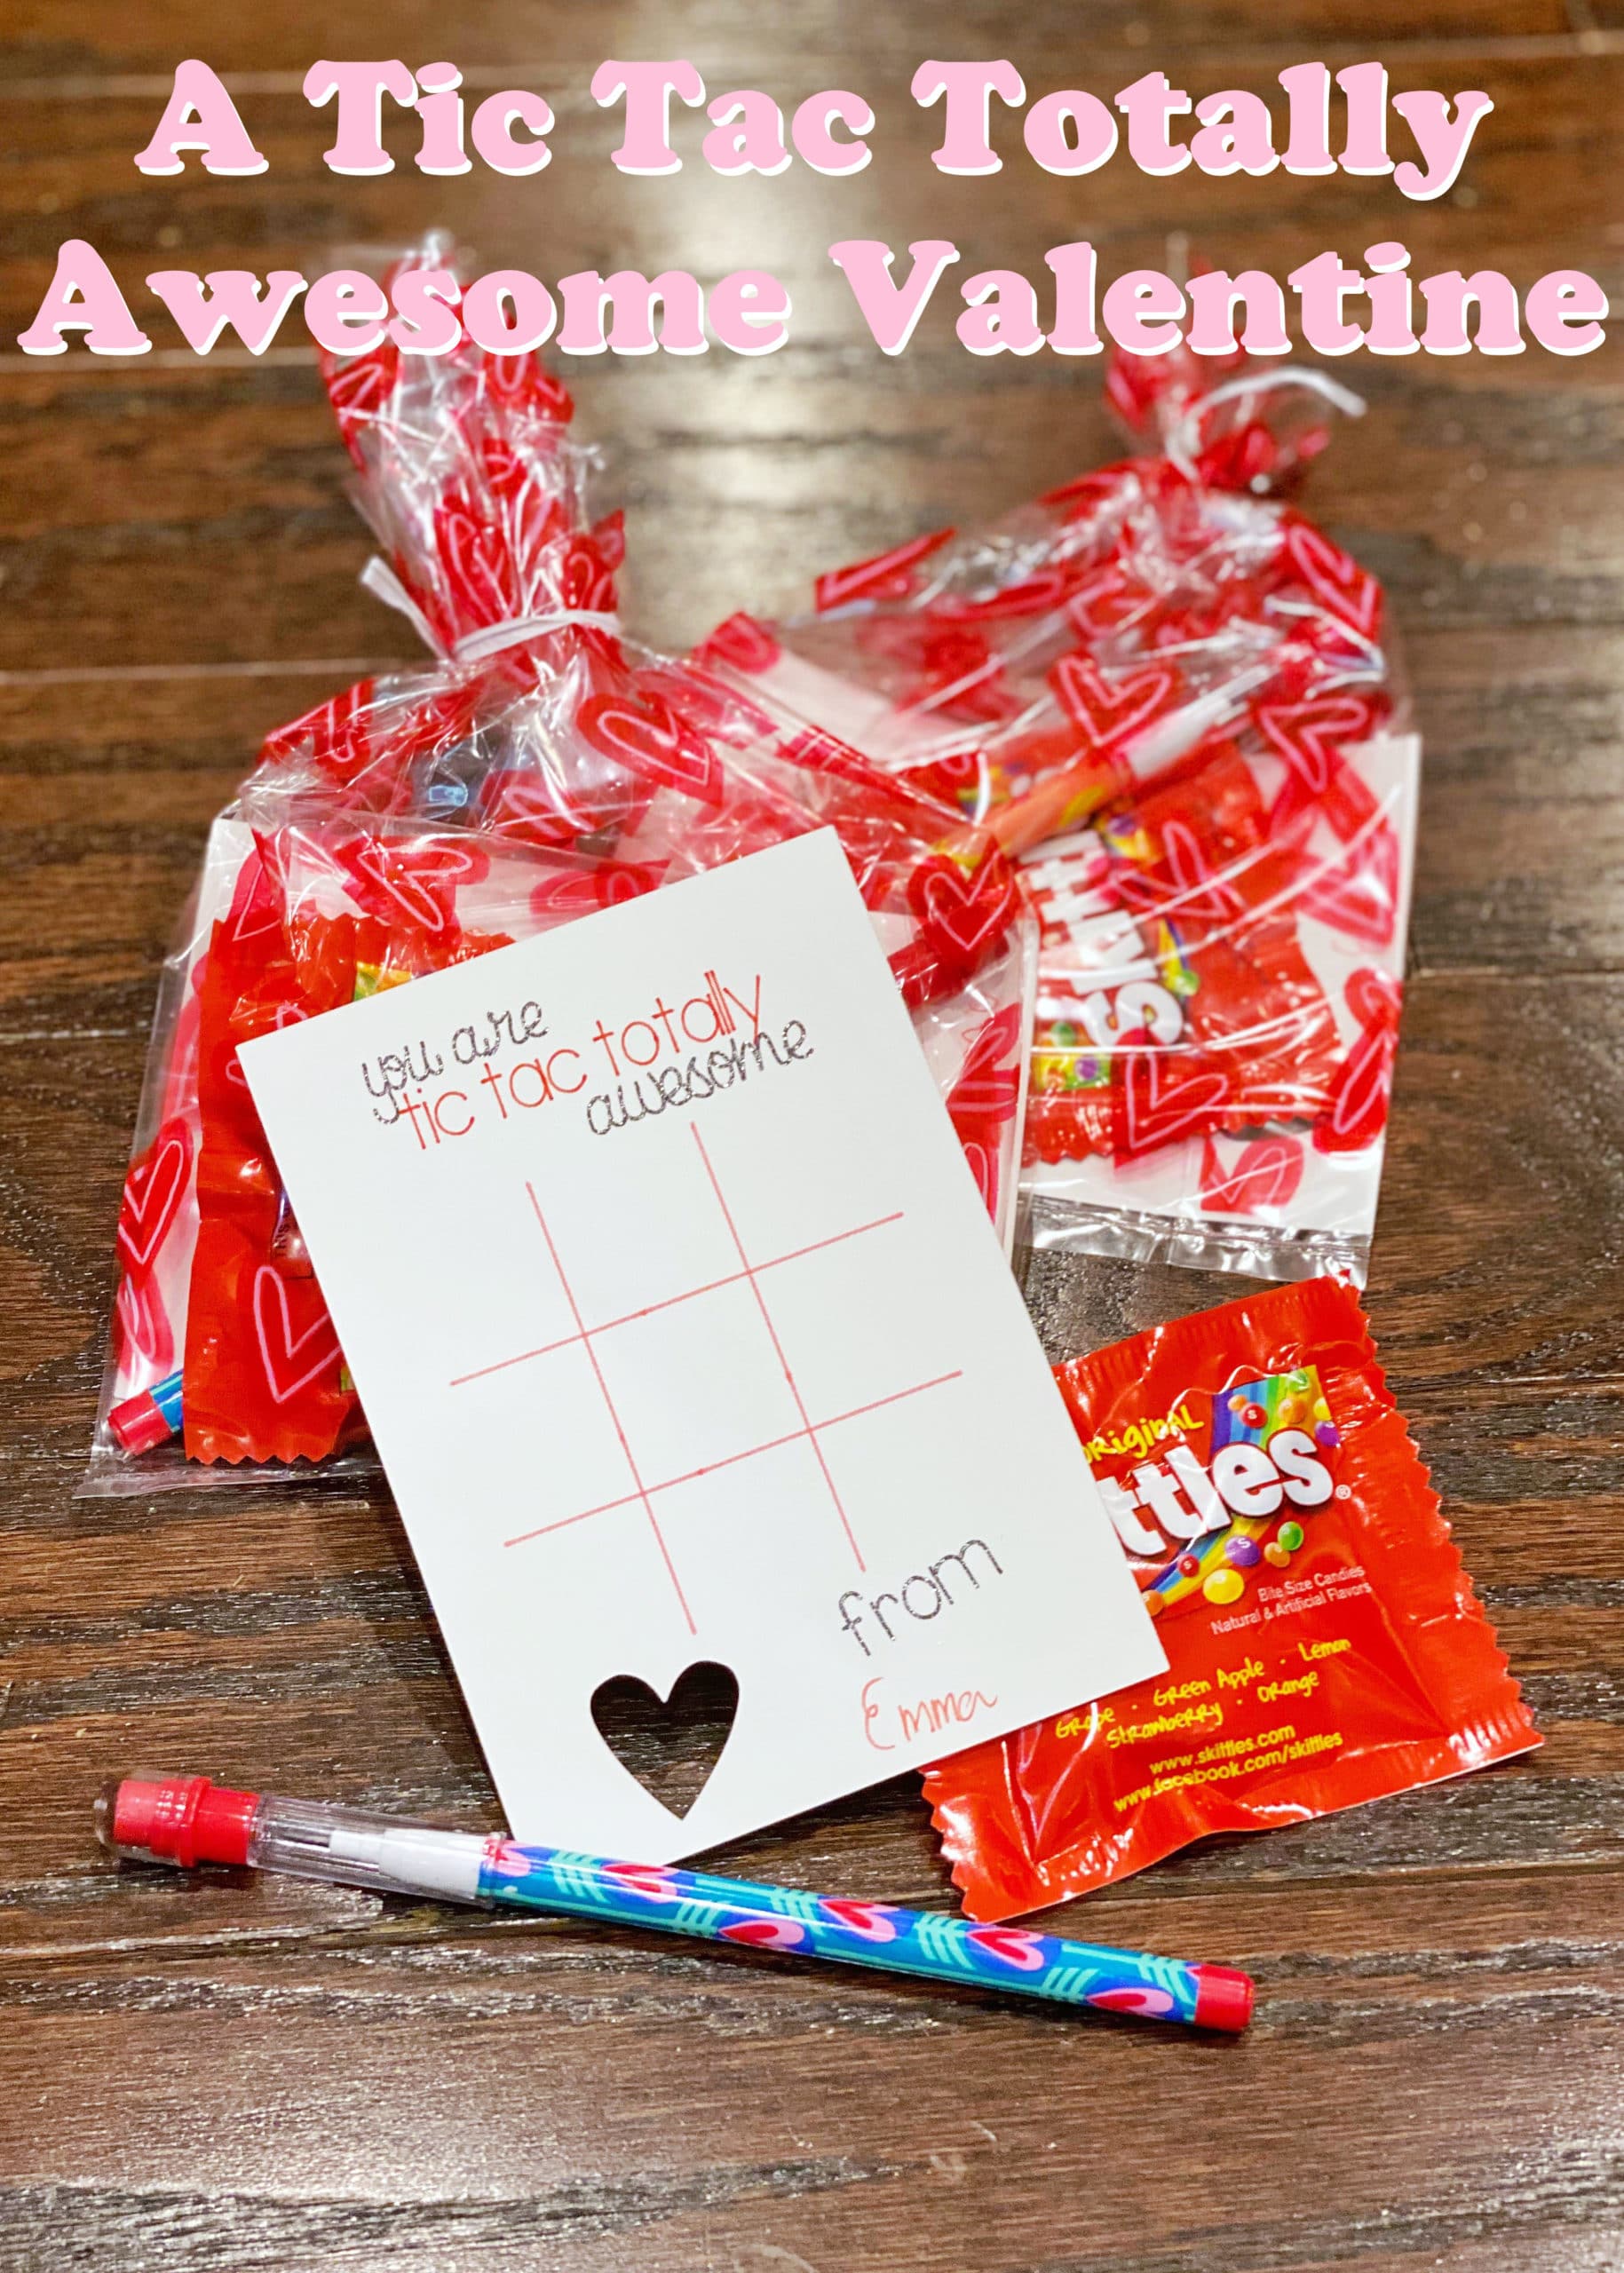 This is an image of a custom Valentine featuring a tic tac toe board, a small package of Skittles, and a pencil.